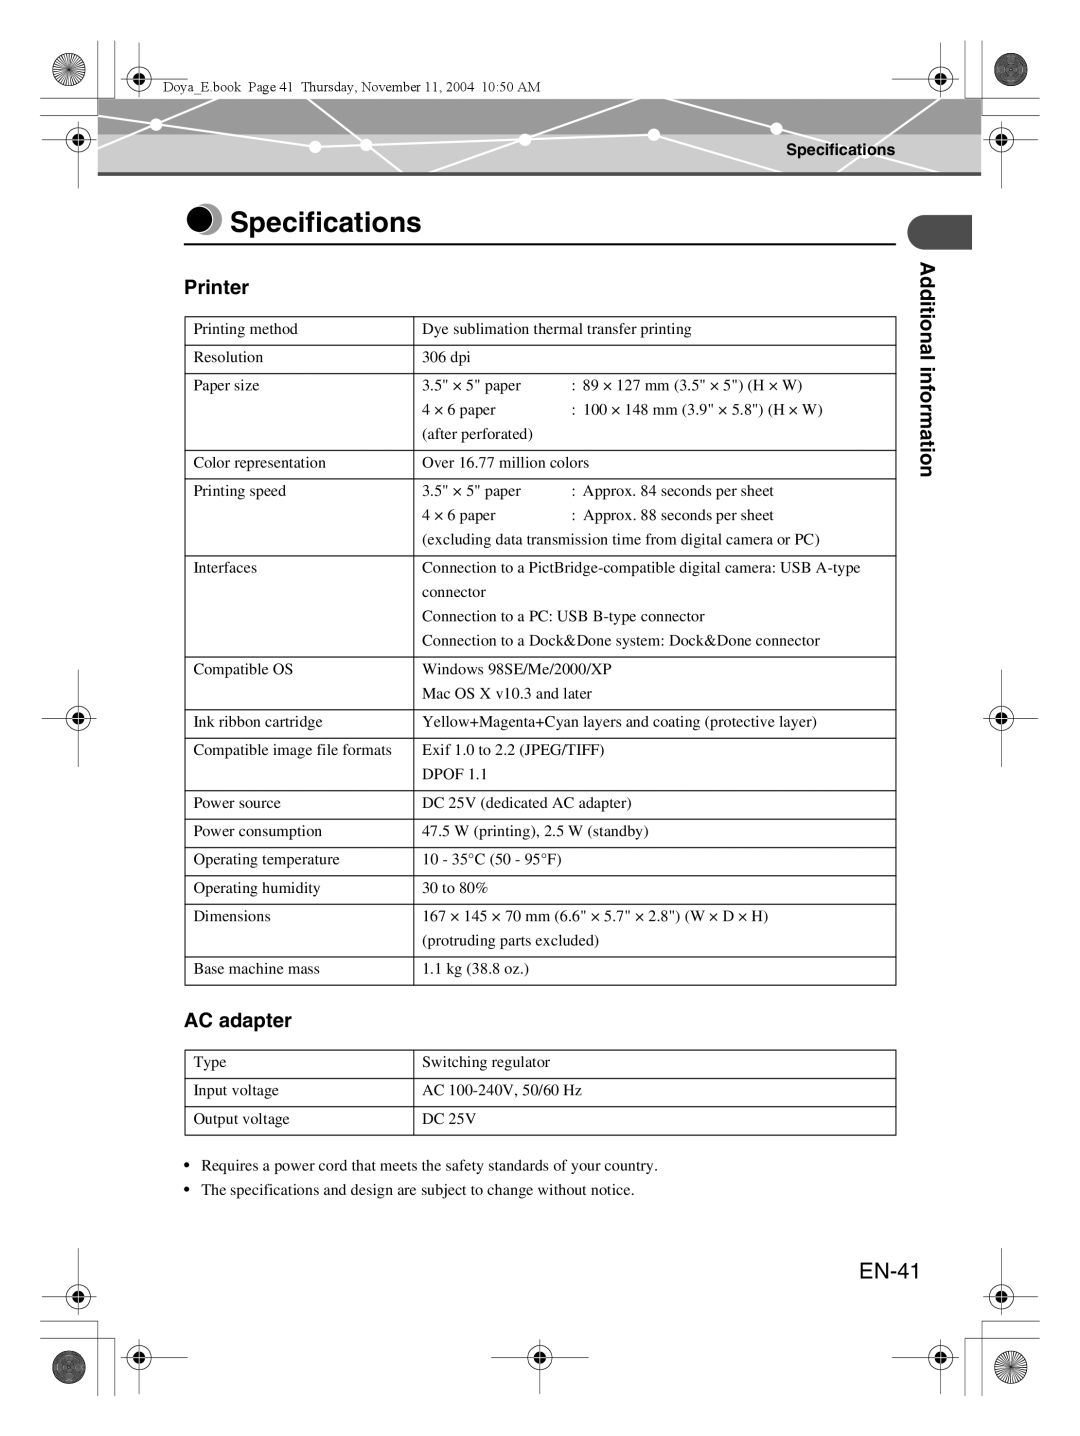 Olympus P-S100 user manual Specifications, EN-41, Printer, AC adapter, Additional information 